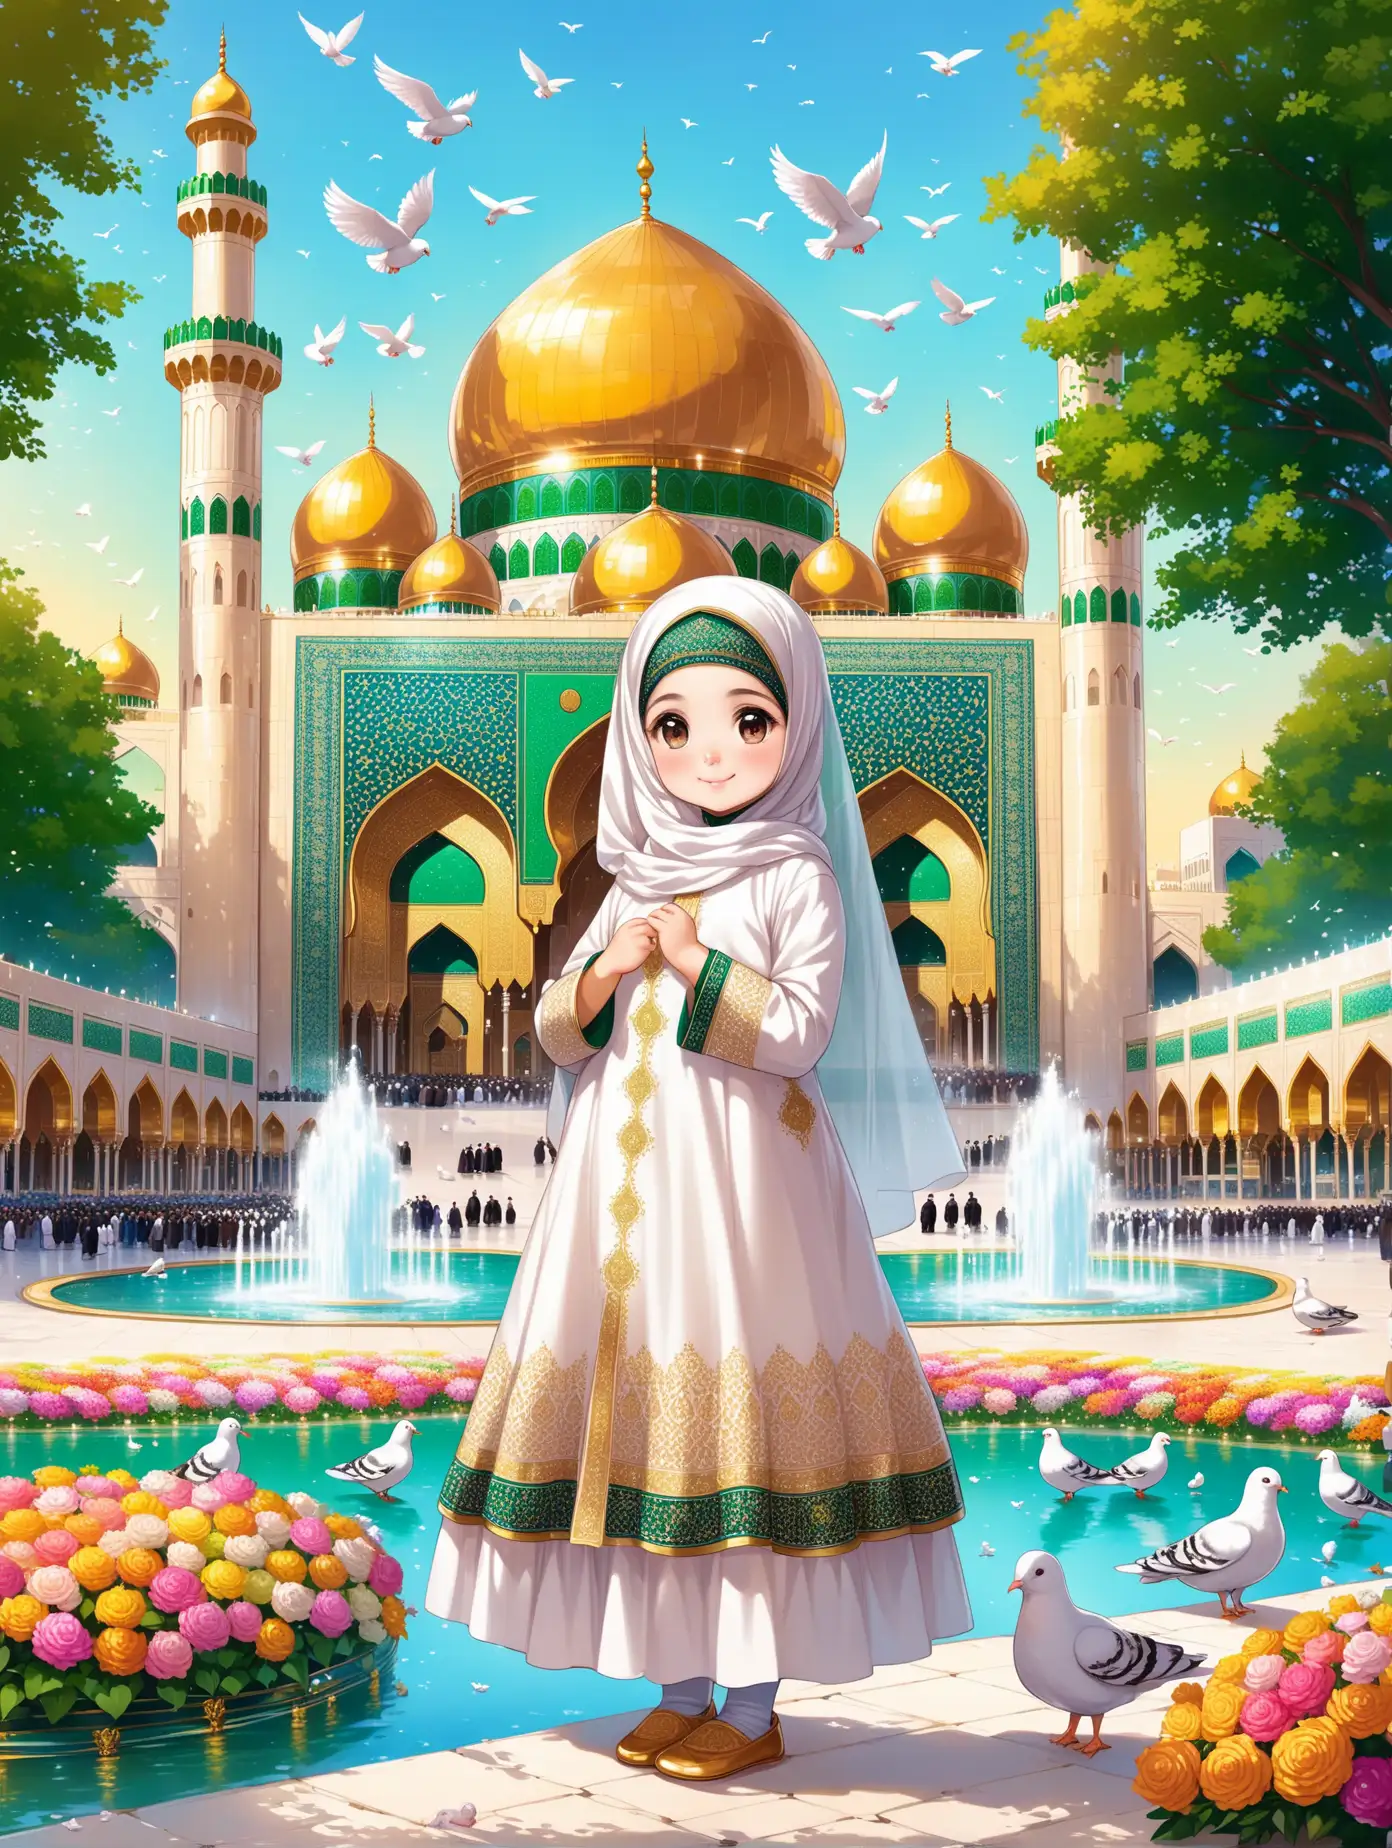 Character Persian little girl(full height, proudly, baby face, Muslim, with emphasis no hair out of veil(Hijab), smaller eyes, bigger nose, white skin, cute, smiling, wearing socks, clothes full of Persian designs).

Atmosphere beautiful shrine of Imam Reza, yard, golden dome, colorful flowers, pond with water fountain, many pigeons, nobody.